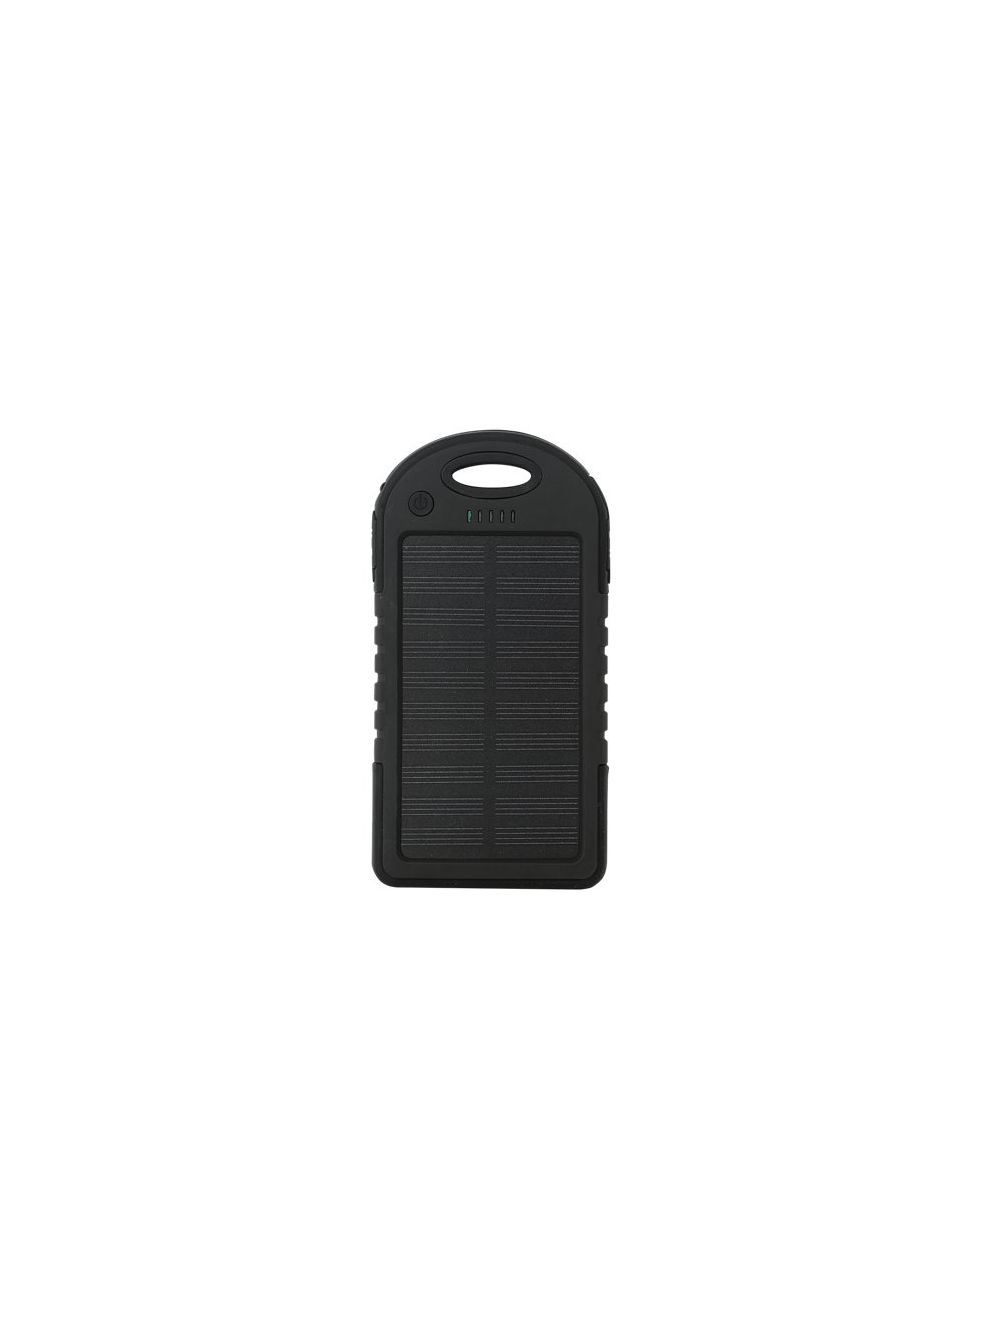 Msp Life Solar Charger